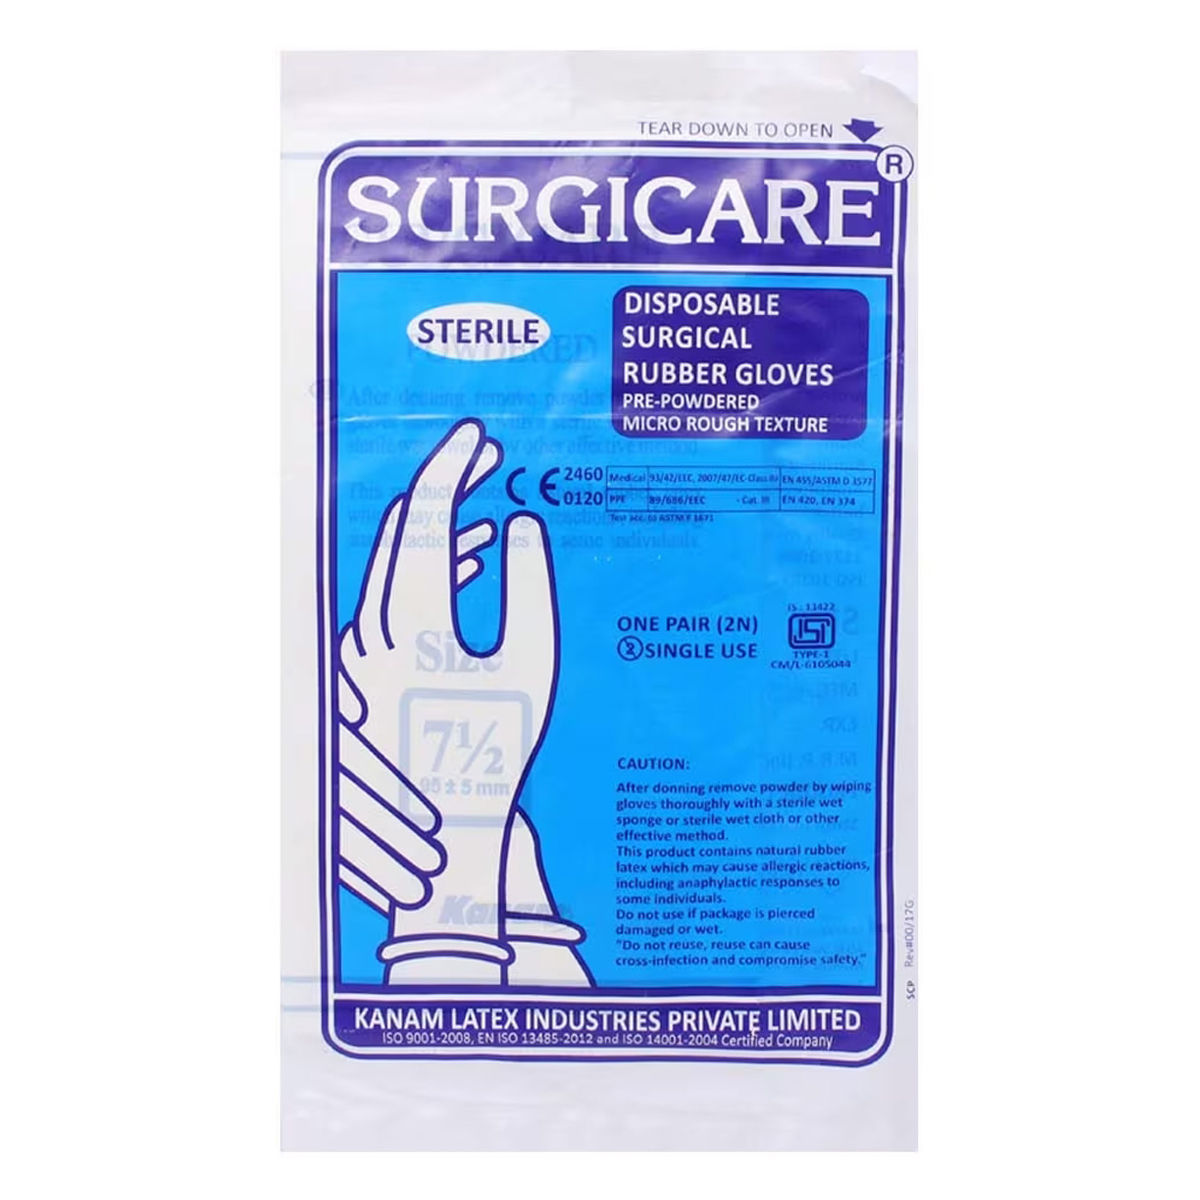 Buy Surgicare Sterile Gloves 7.5, 1 Count Online